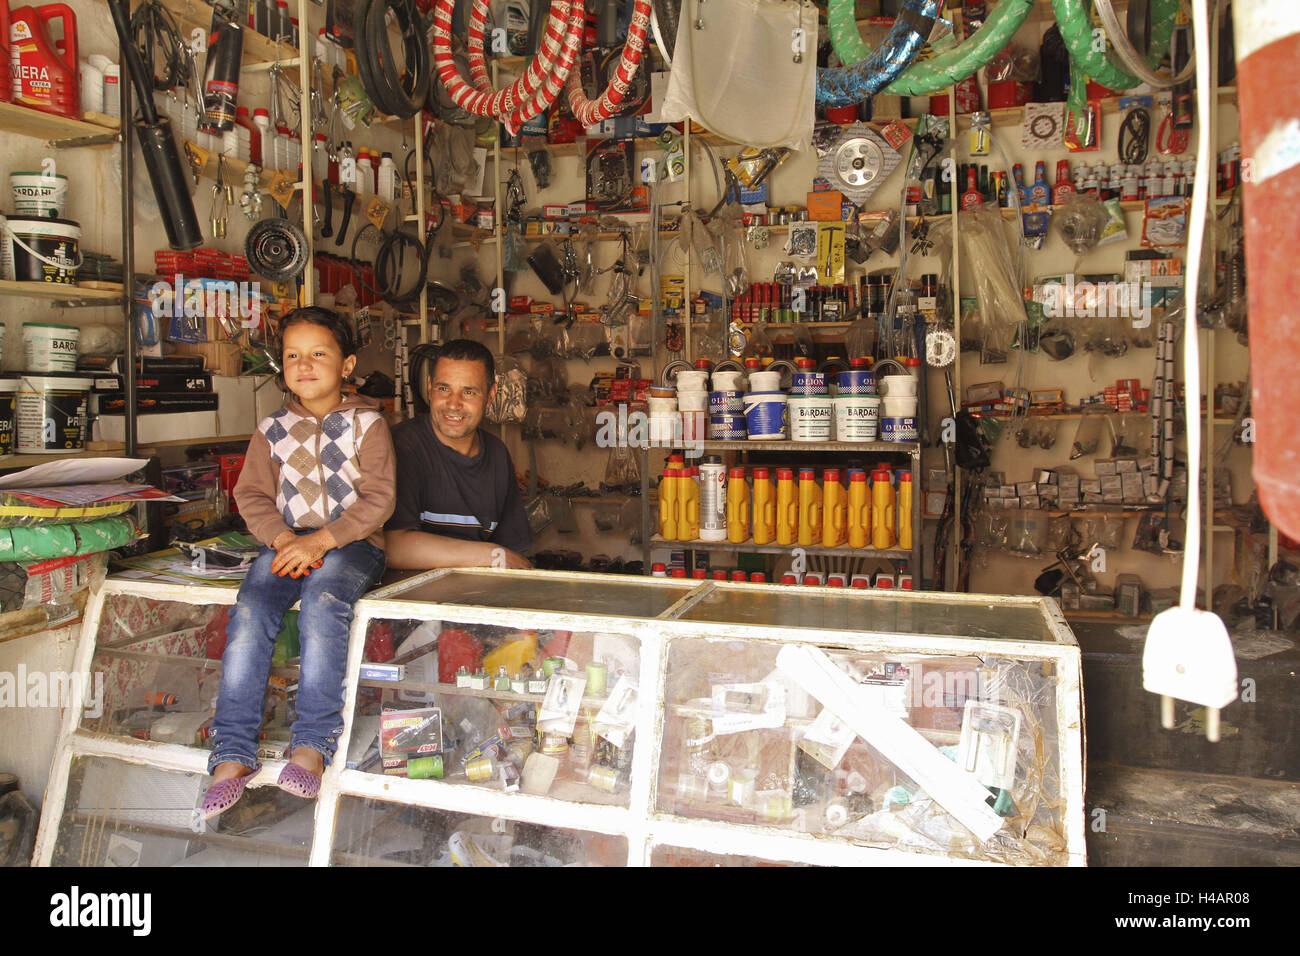 Africa, Morocco, Boudnib, people in shop, Stock Photo